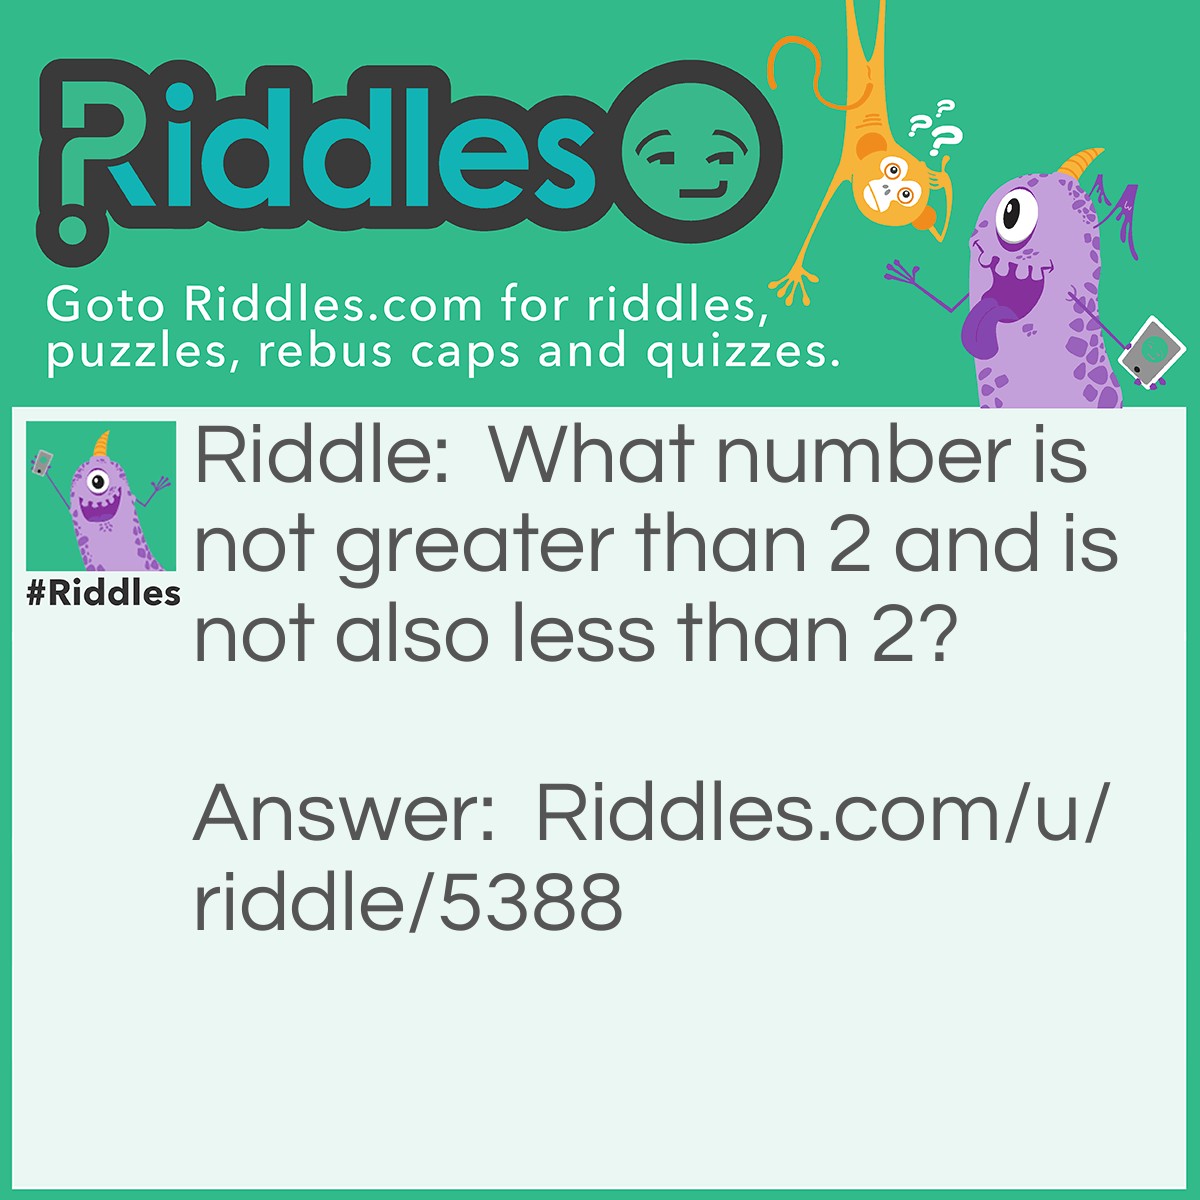 Riddle: What number is not greater than 2 and is not also less than 2? Answer: The number 2.